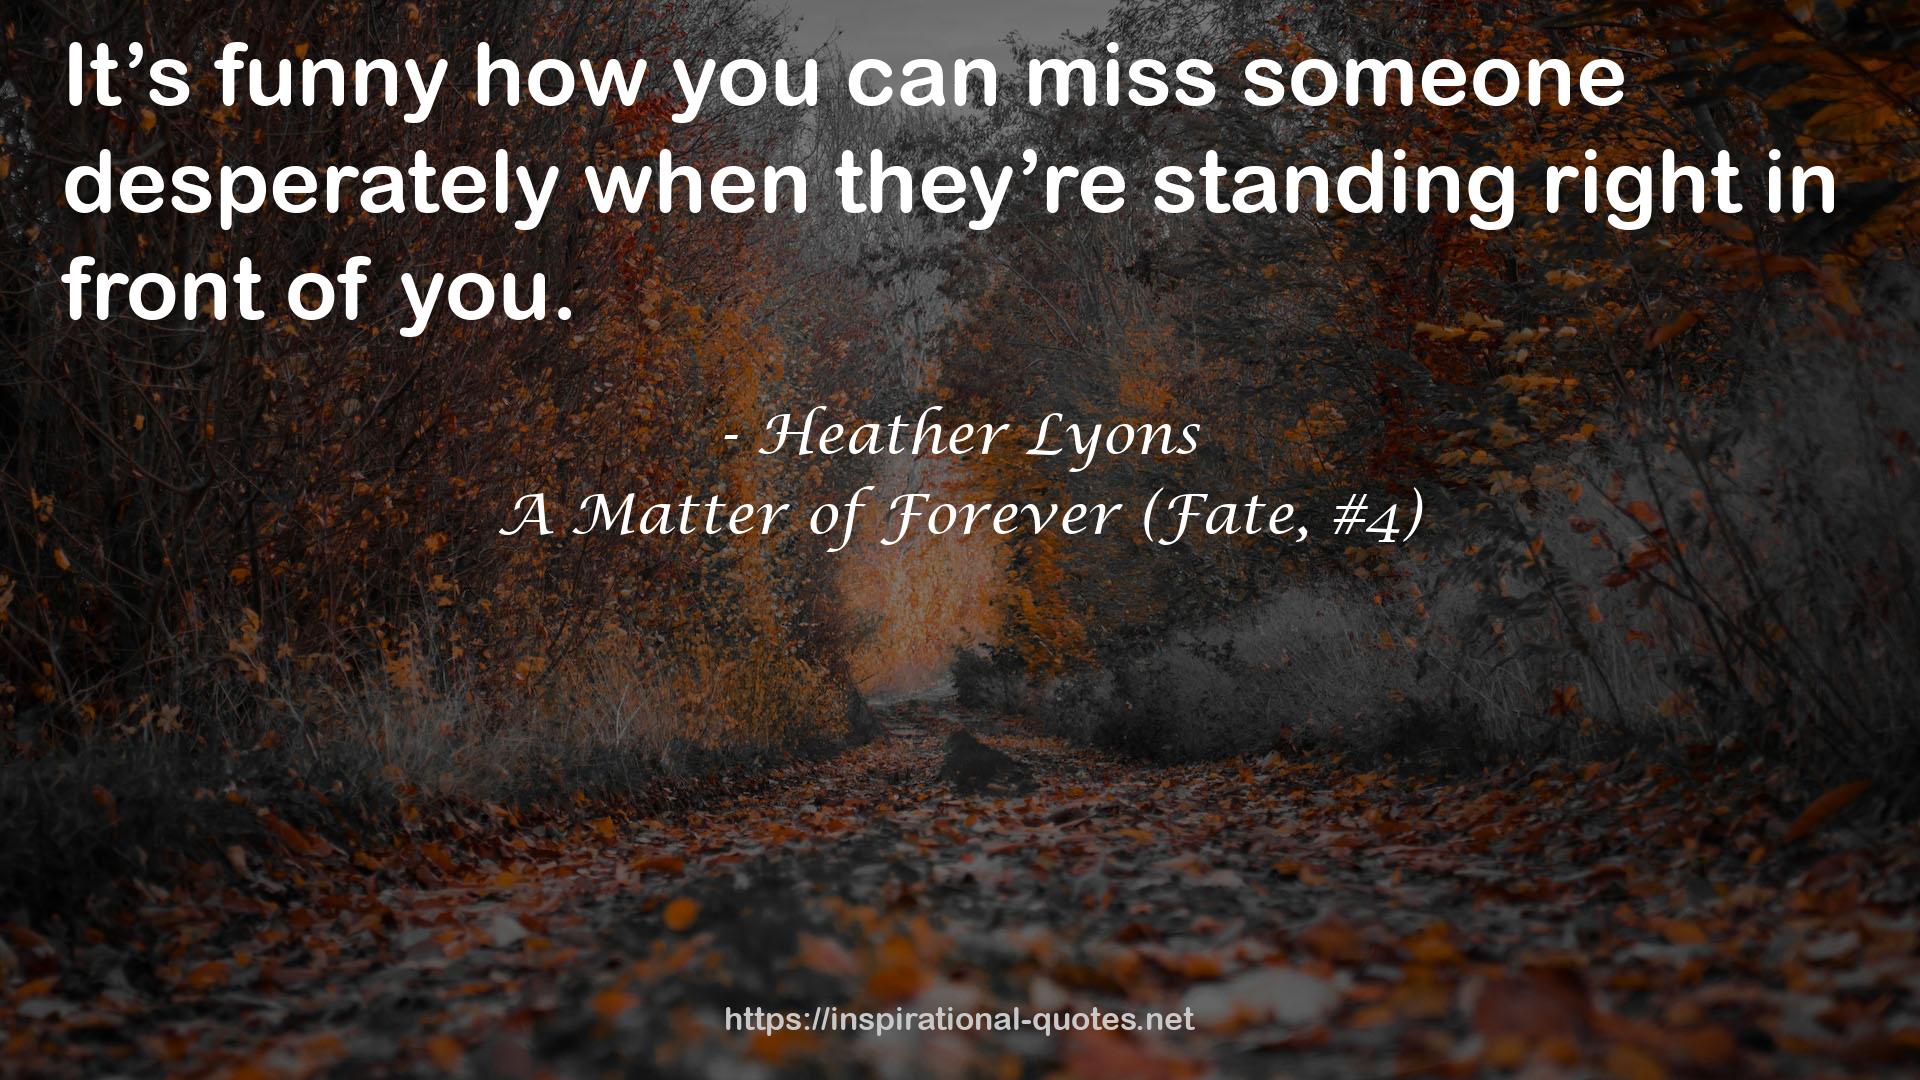 A Matter of Forever (Fate, #4) QUOTES